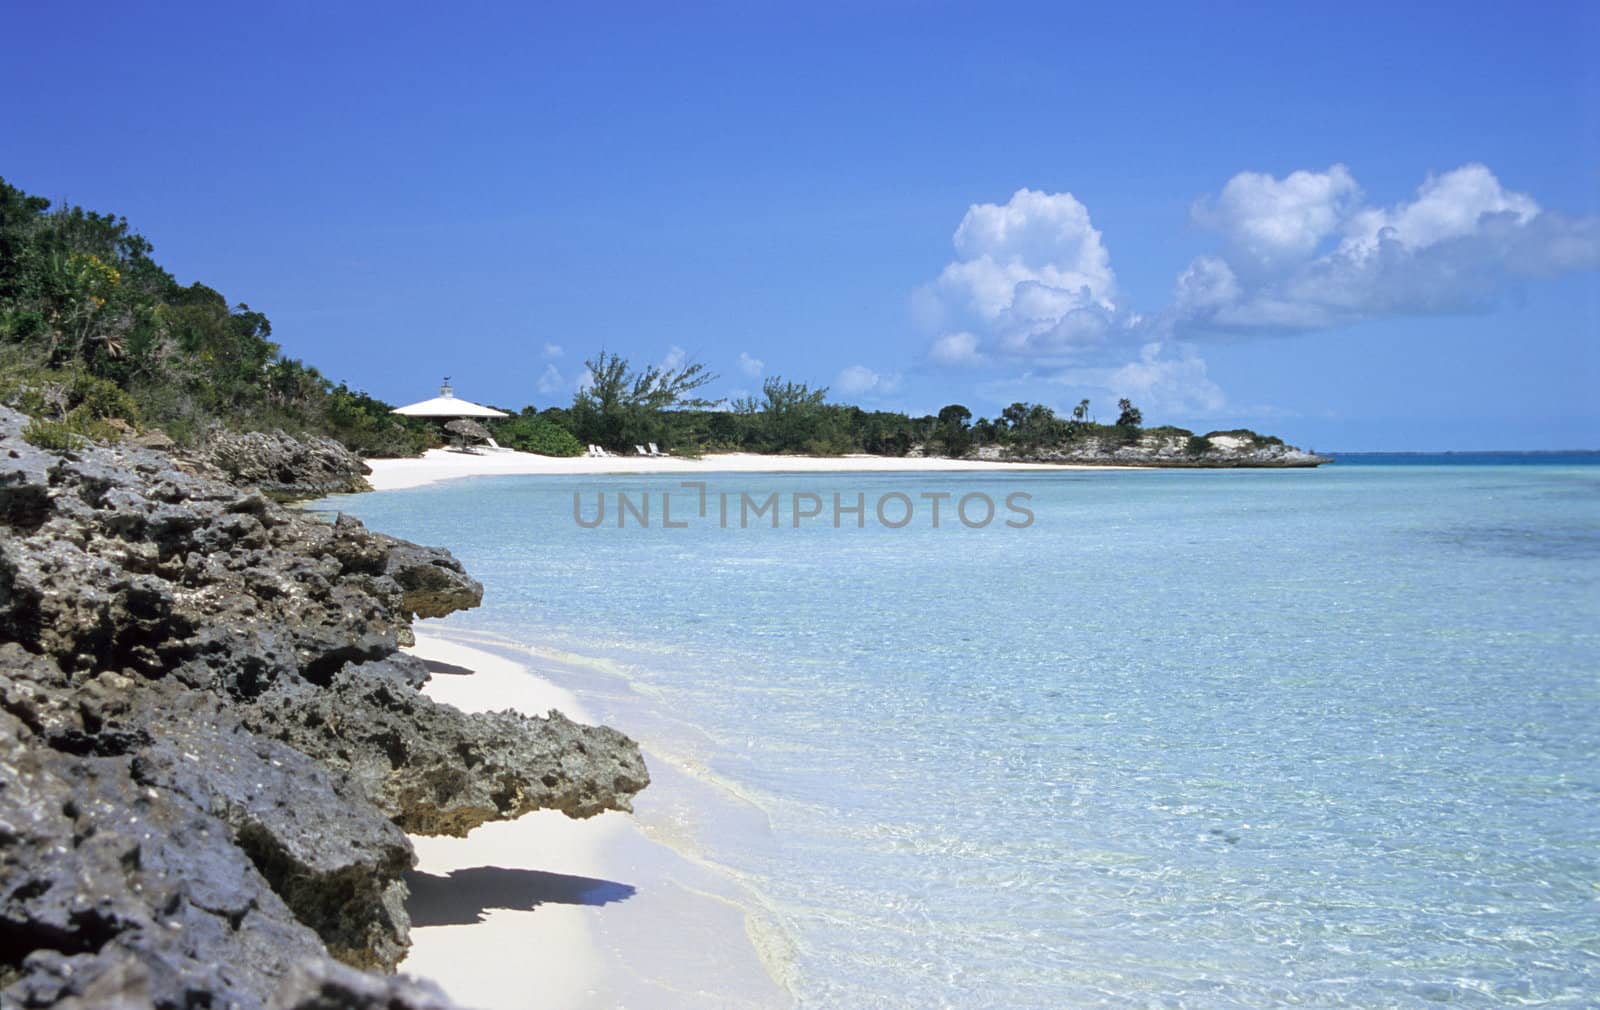 The white sandy beaches and volcanic rock of a deserted island in the Bahamas.